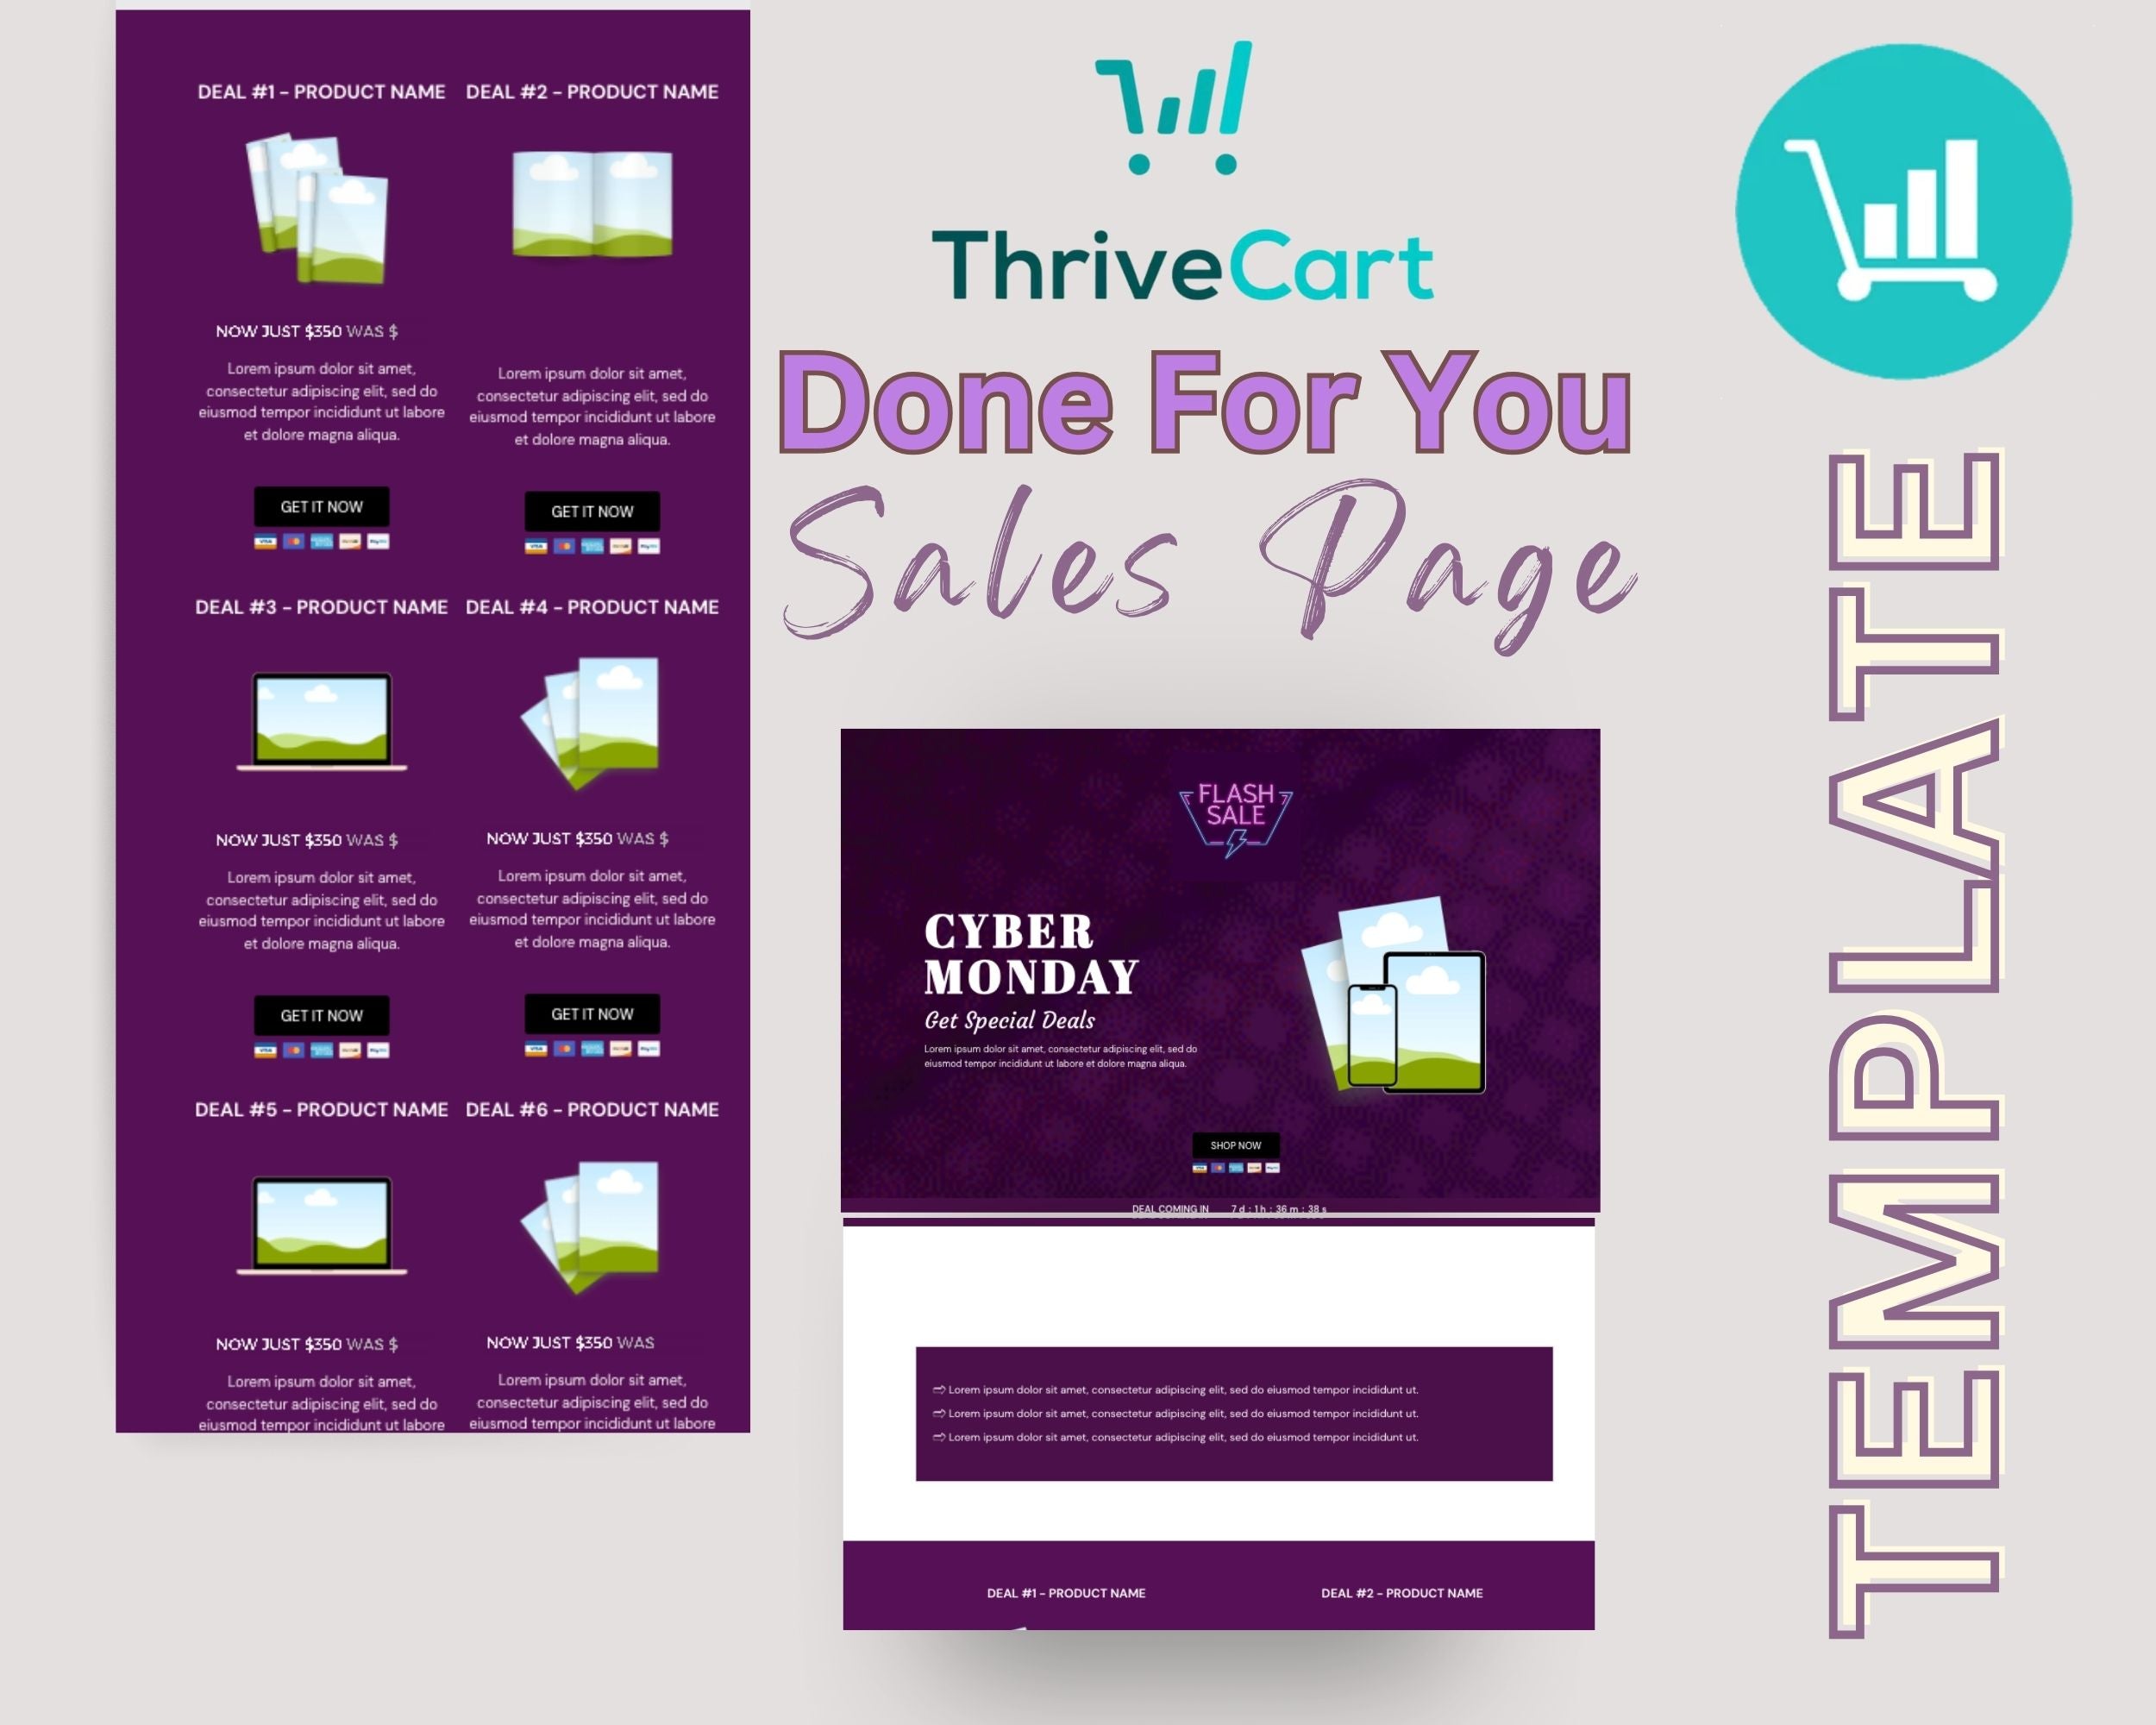 Animated Cyber Monday Sales Page Template in ThriveCart